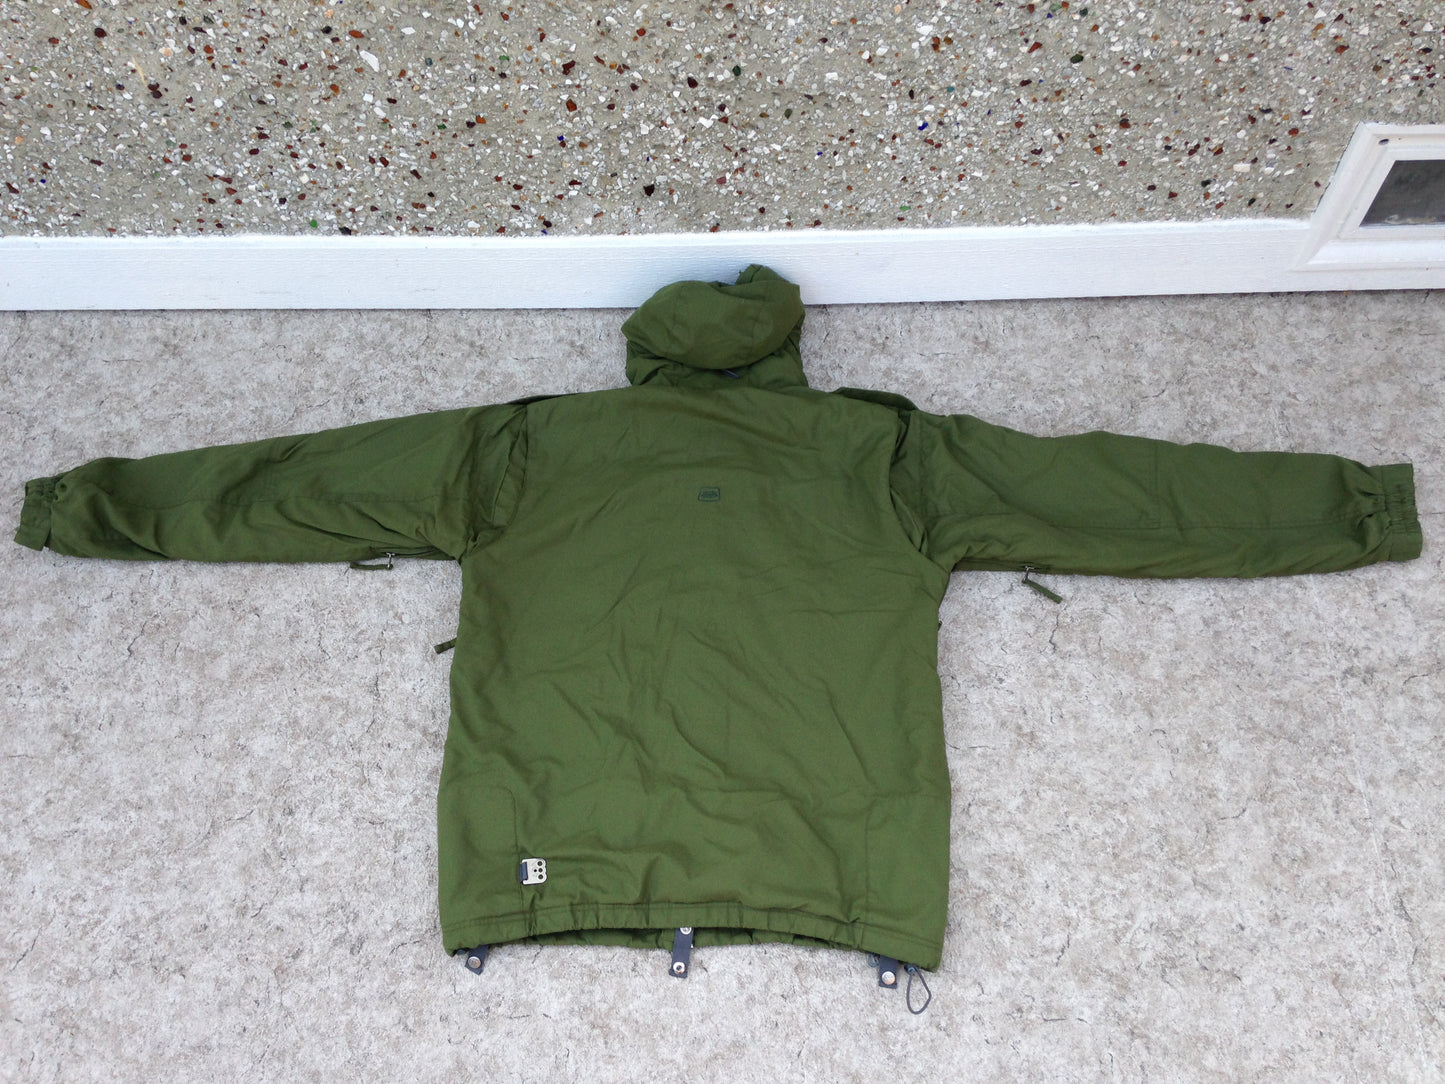 Winter Coat Men's Size X Large 686 Snowboarding With Snow Belt Hunter Green Minor Wear Outstanding Quality